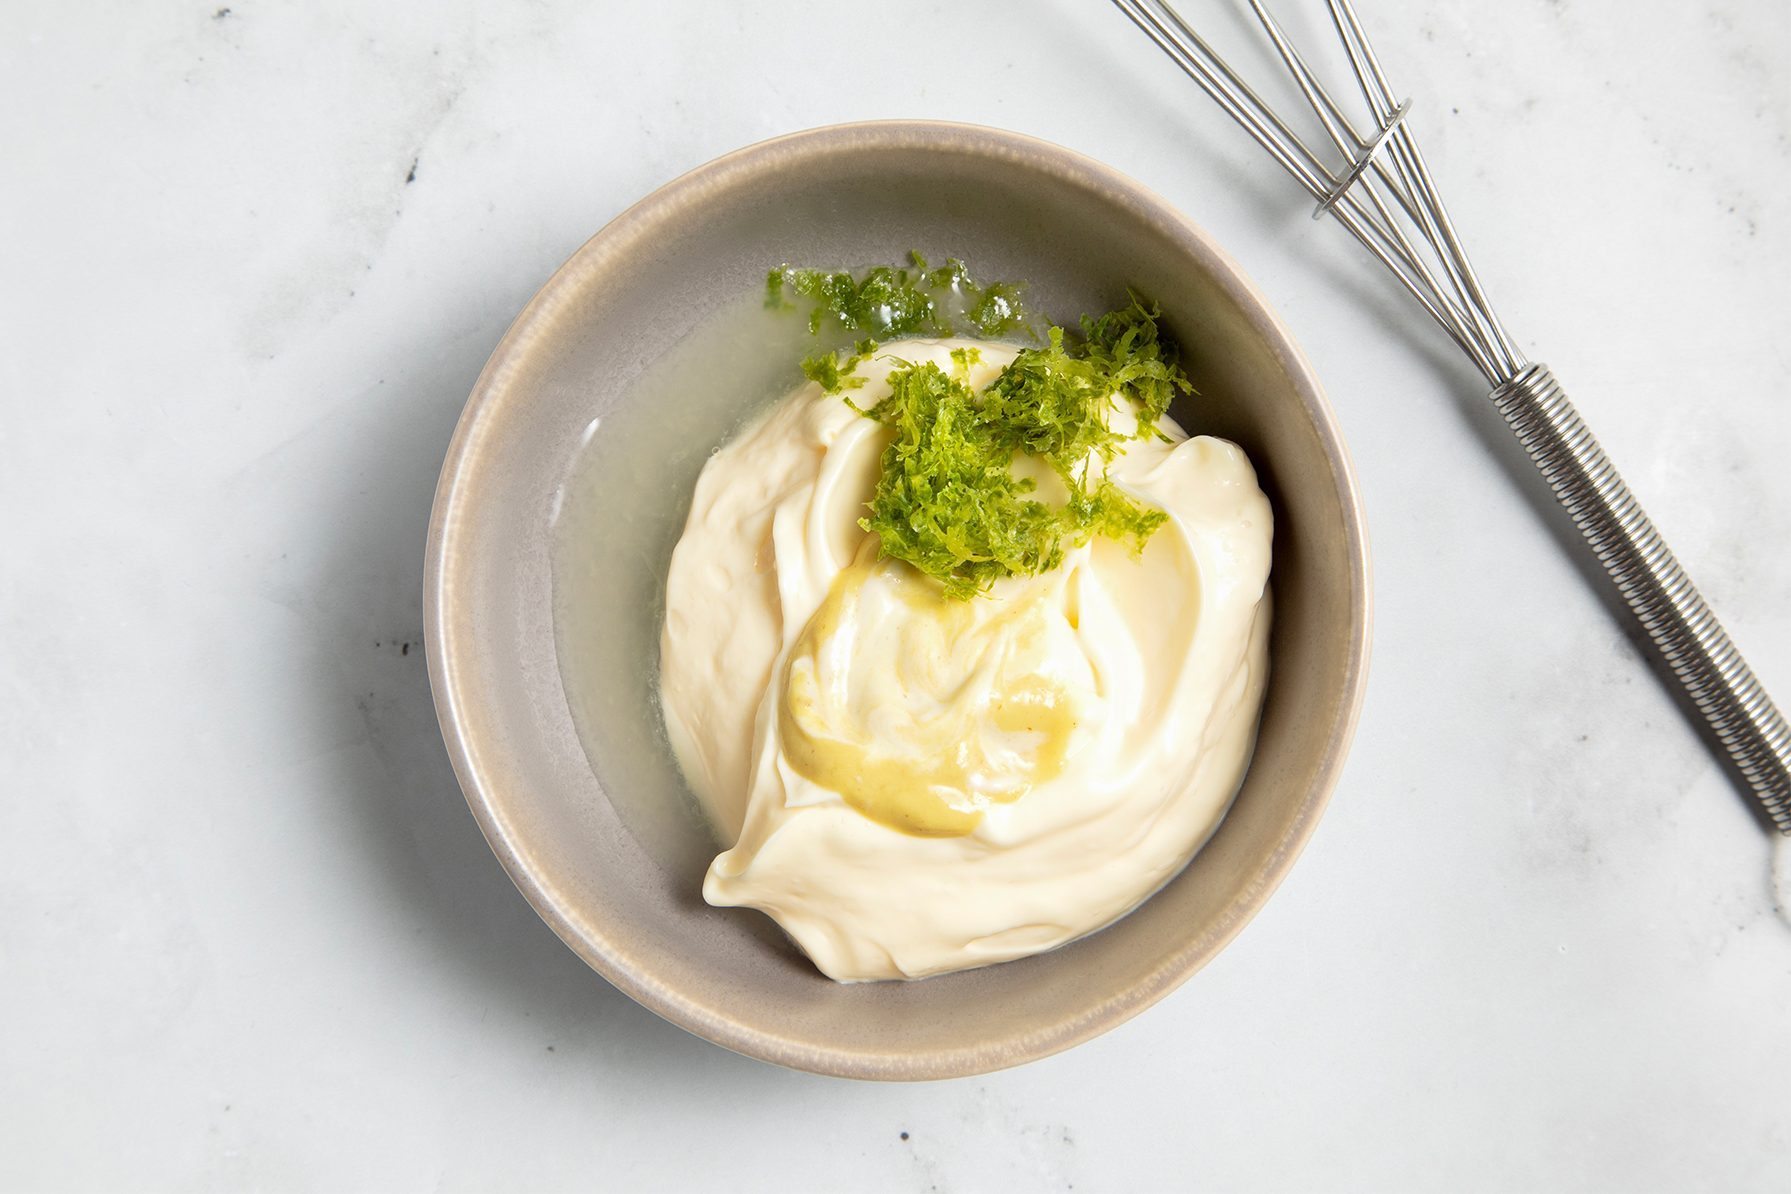 A beige bowl filled with creamy mayonnaise garnished with a sprinkling of lime zest on top sits on a white marble surface. 